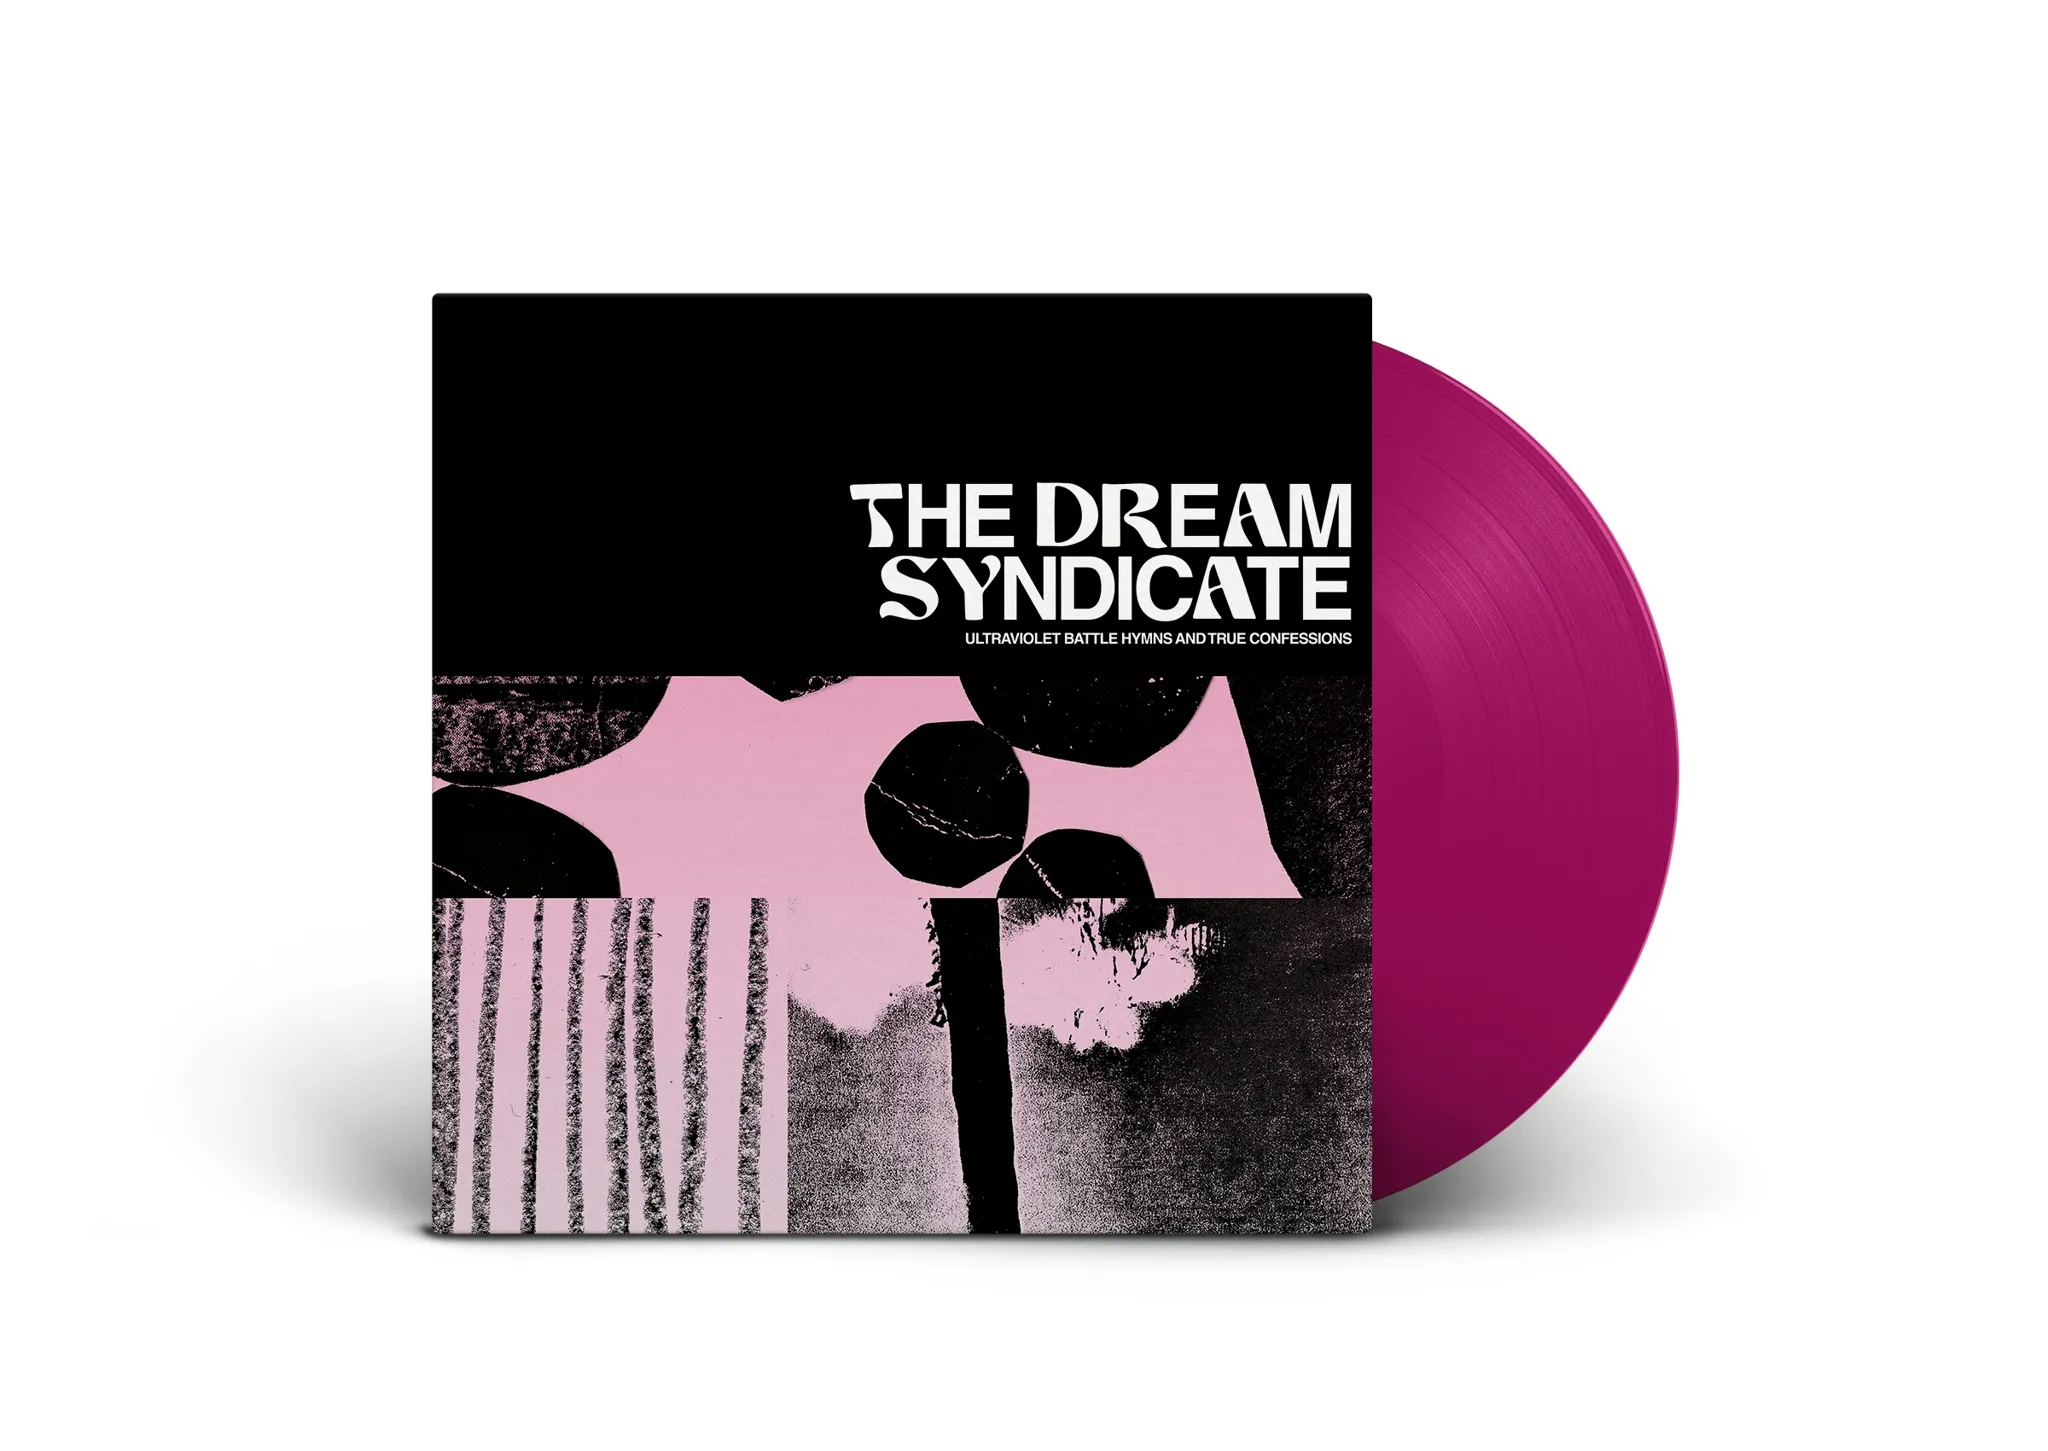 Album artwork for Ultraviolet Battle Hymns and True Confessions by The Dream Syndicate